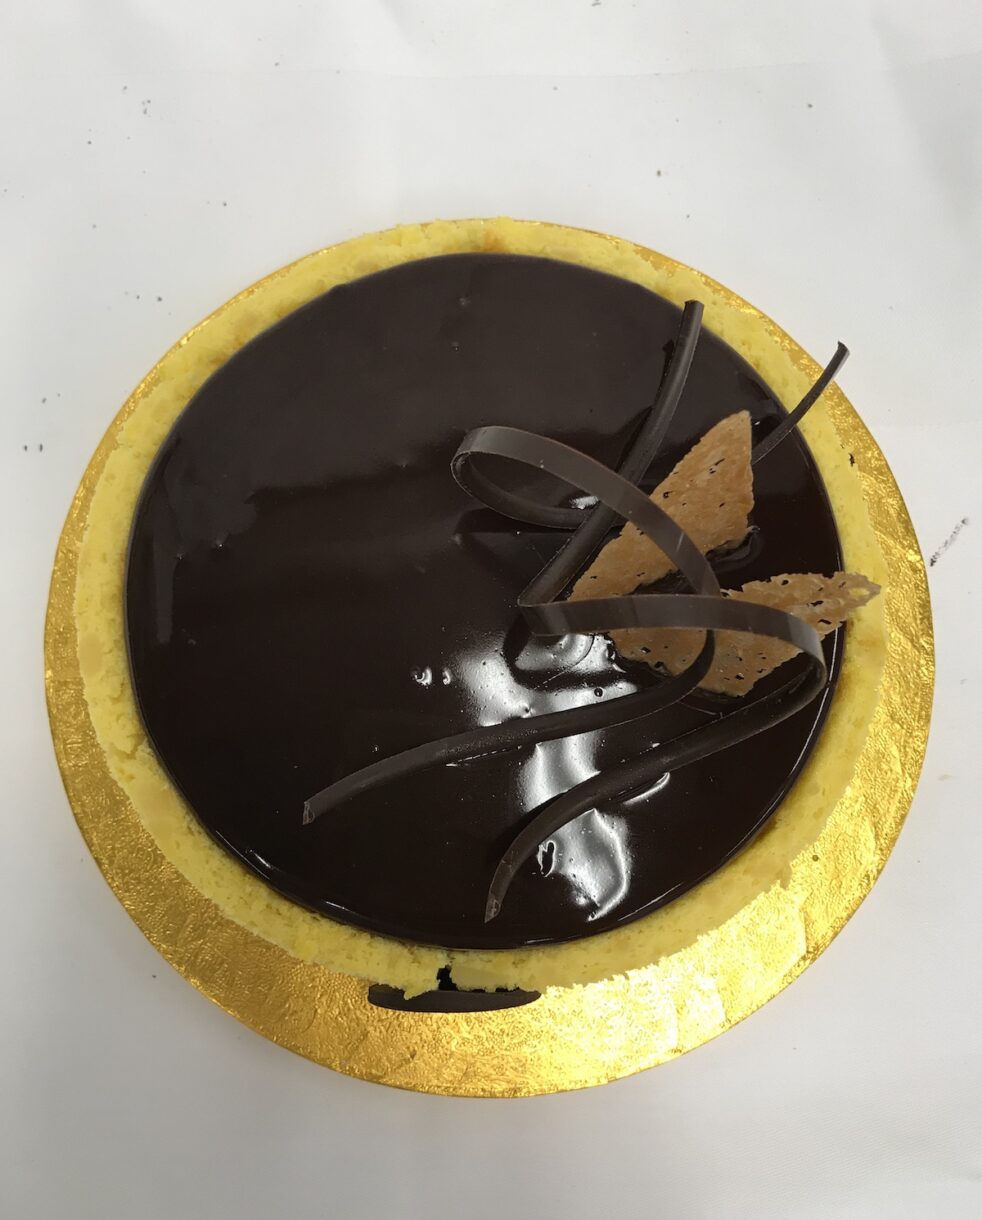 Top view of chocolate curls and chocolate glacage on my finished entremet